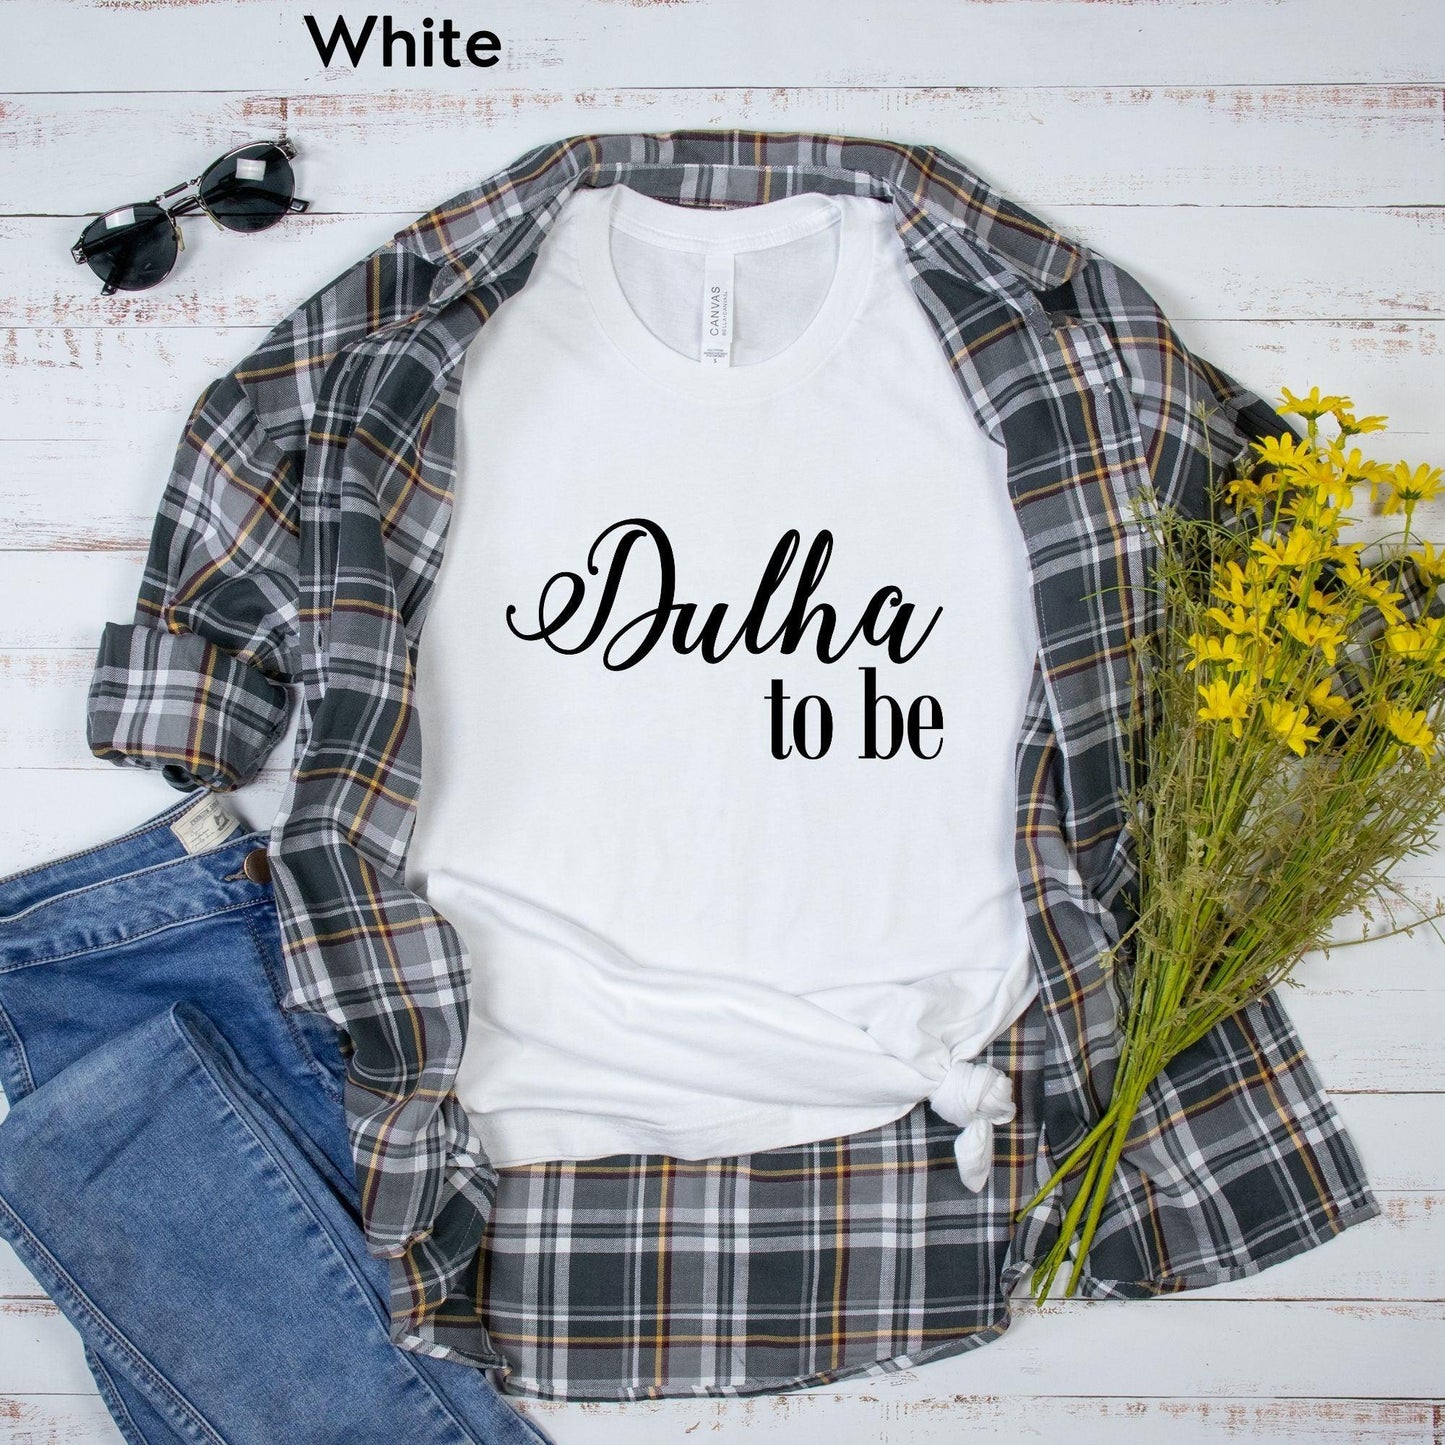 Desi Bride | Dulha Dulhan to be shirt | Bride or Groom to be - Artkins Lifestyle